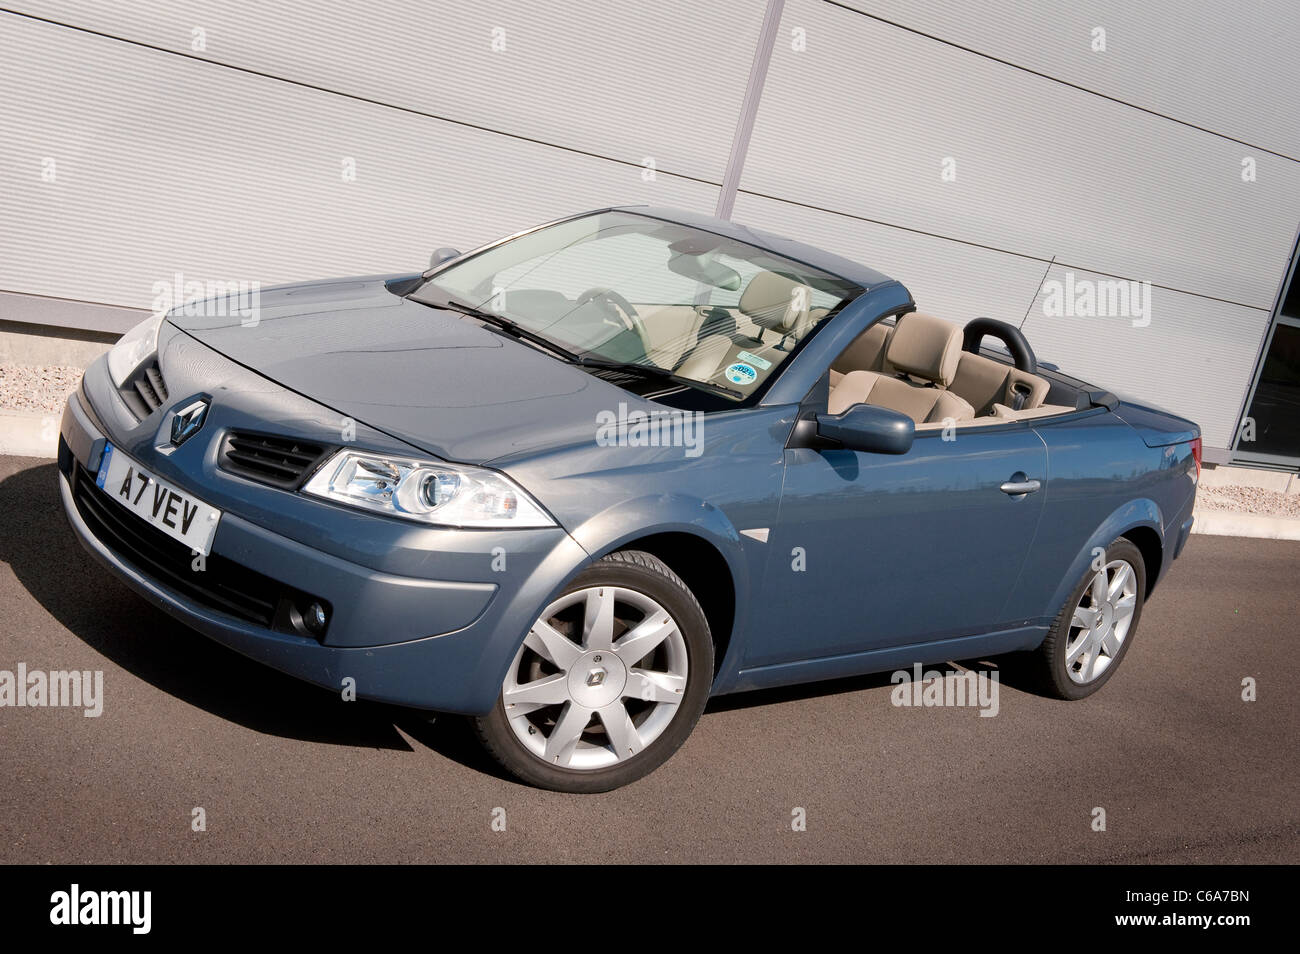 2007 Renault Megane Coupe Cabriolet 150DCI convertible car Stock Photo -  Alamy